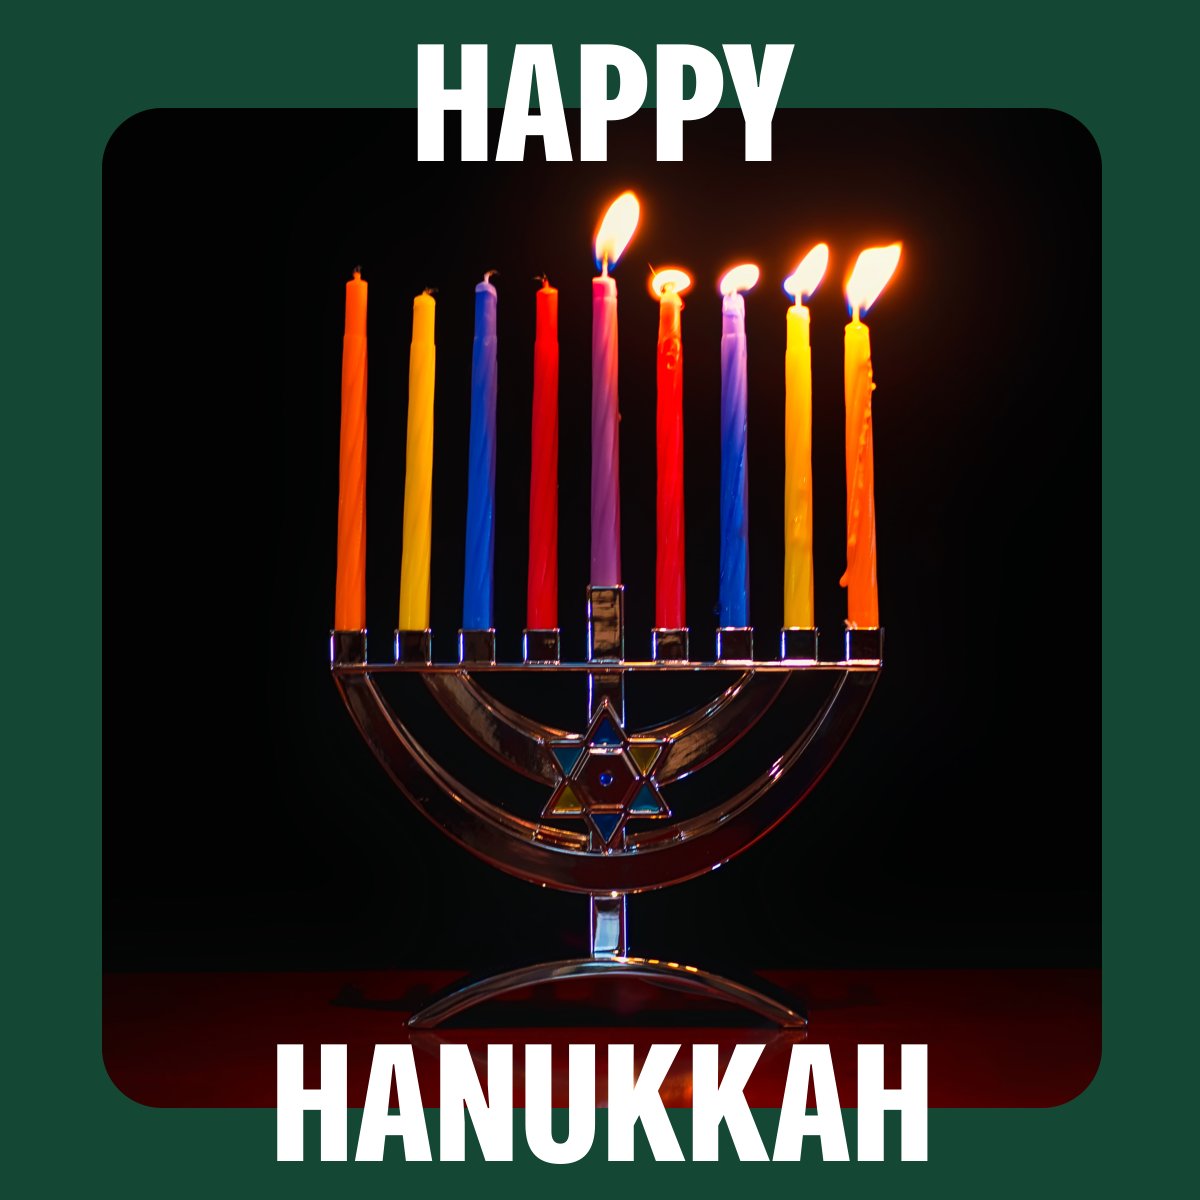 Sending best wishes to all staff, students and alumni for first day of Hanukkah today - a very Hanukkah Sameach to all those marking this celebration 🕎